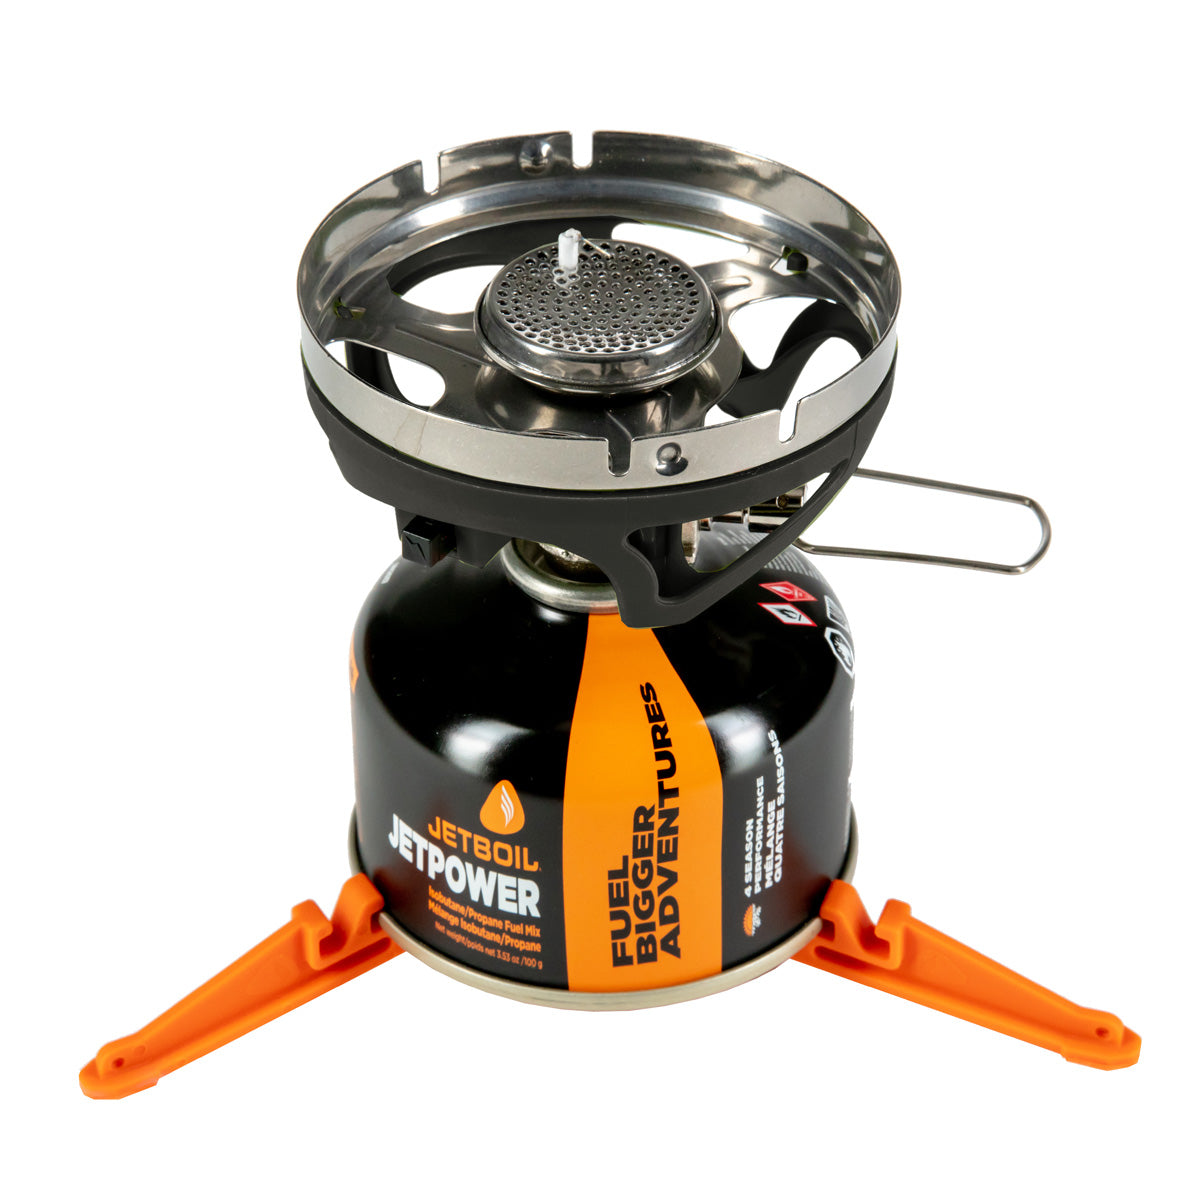 Jetboil MiniMo Cooking Systems